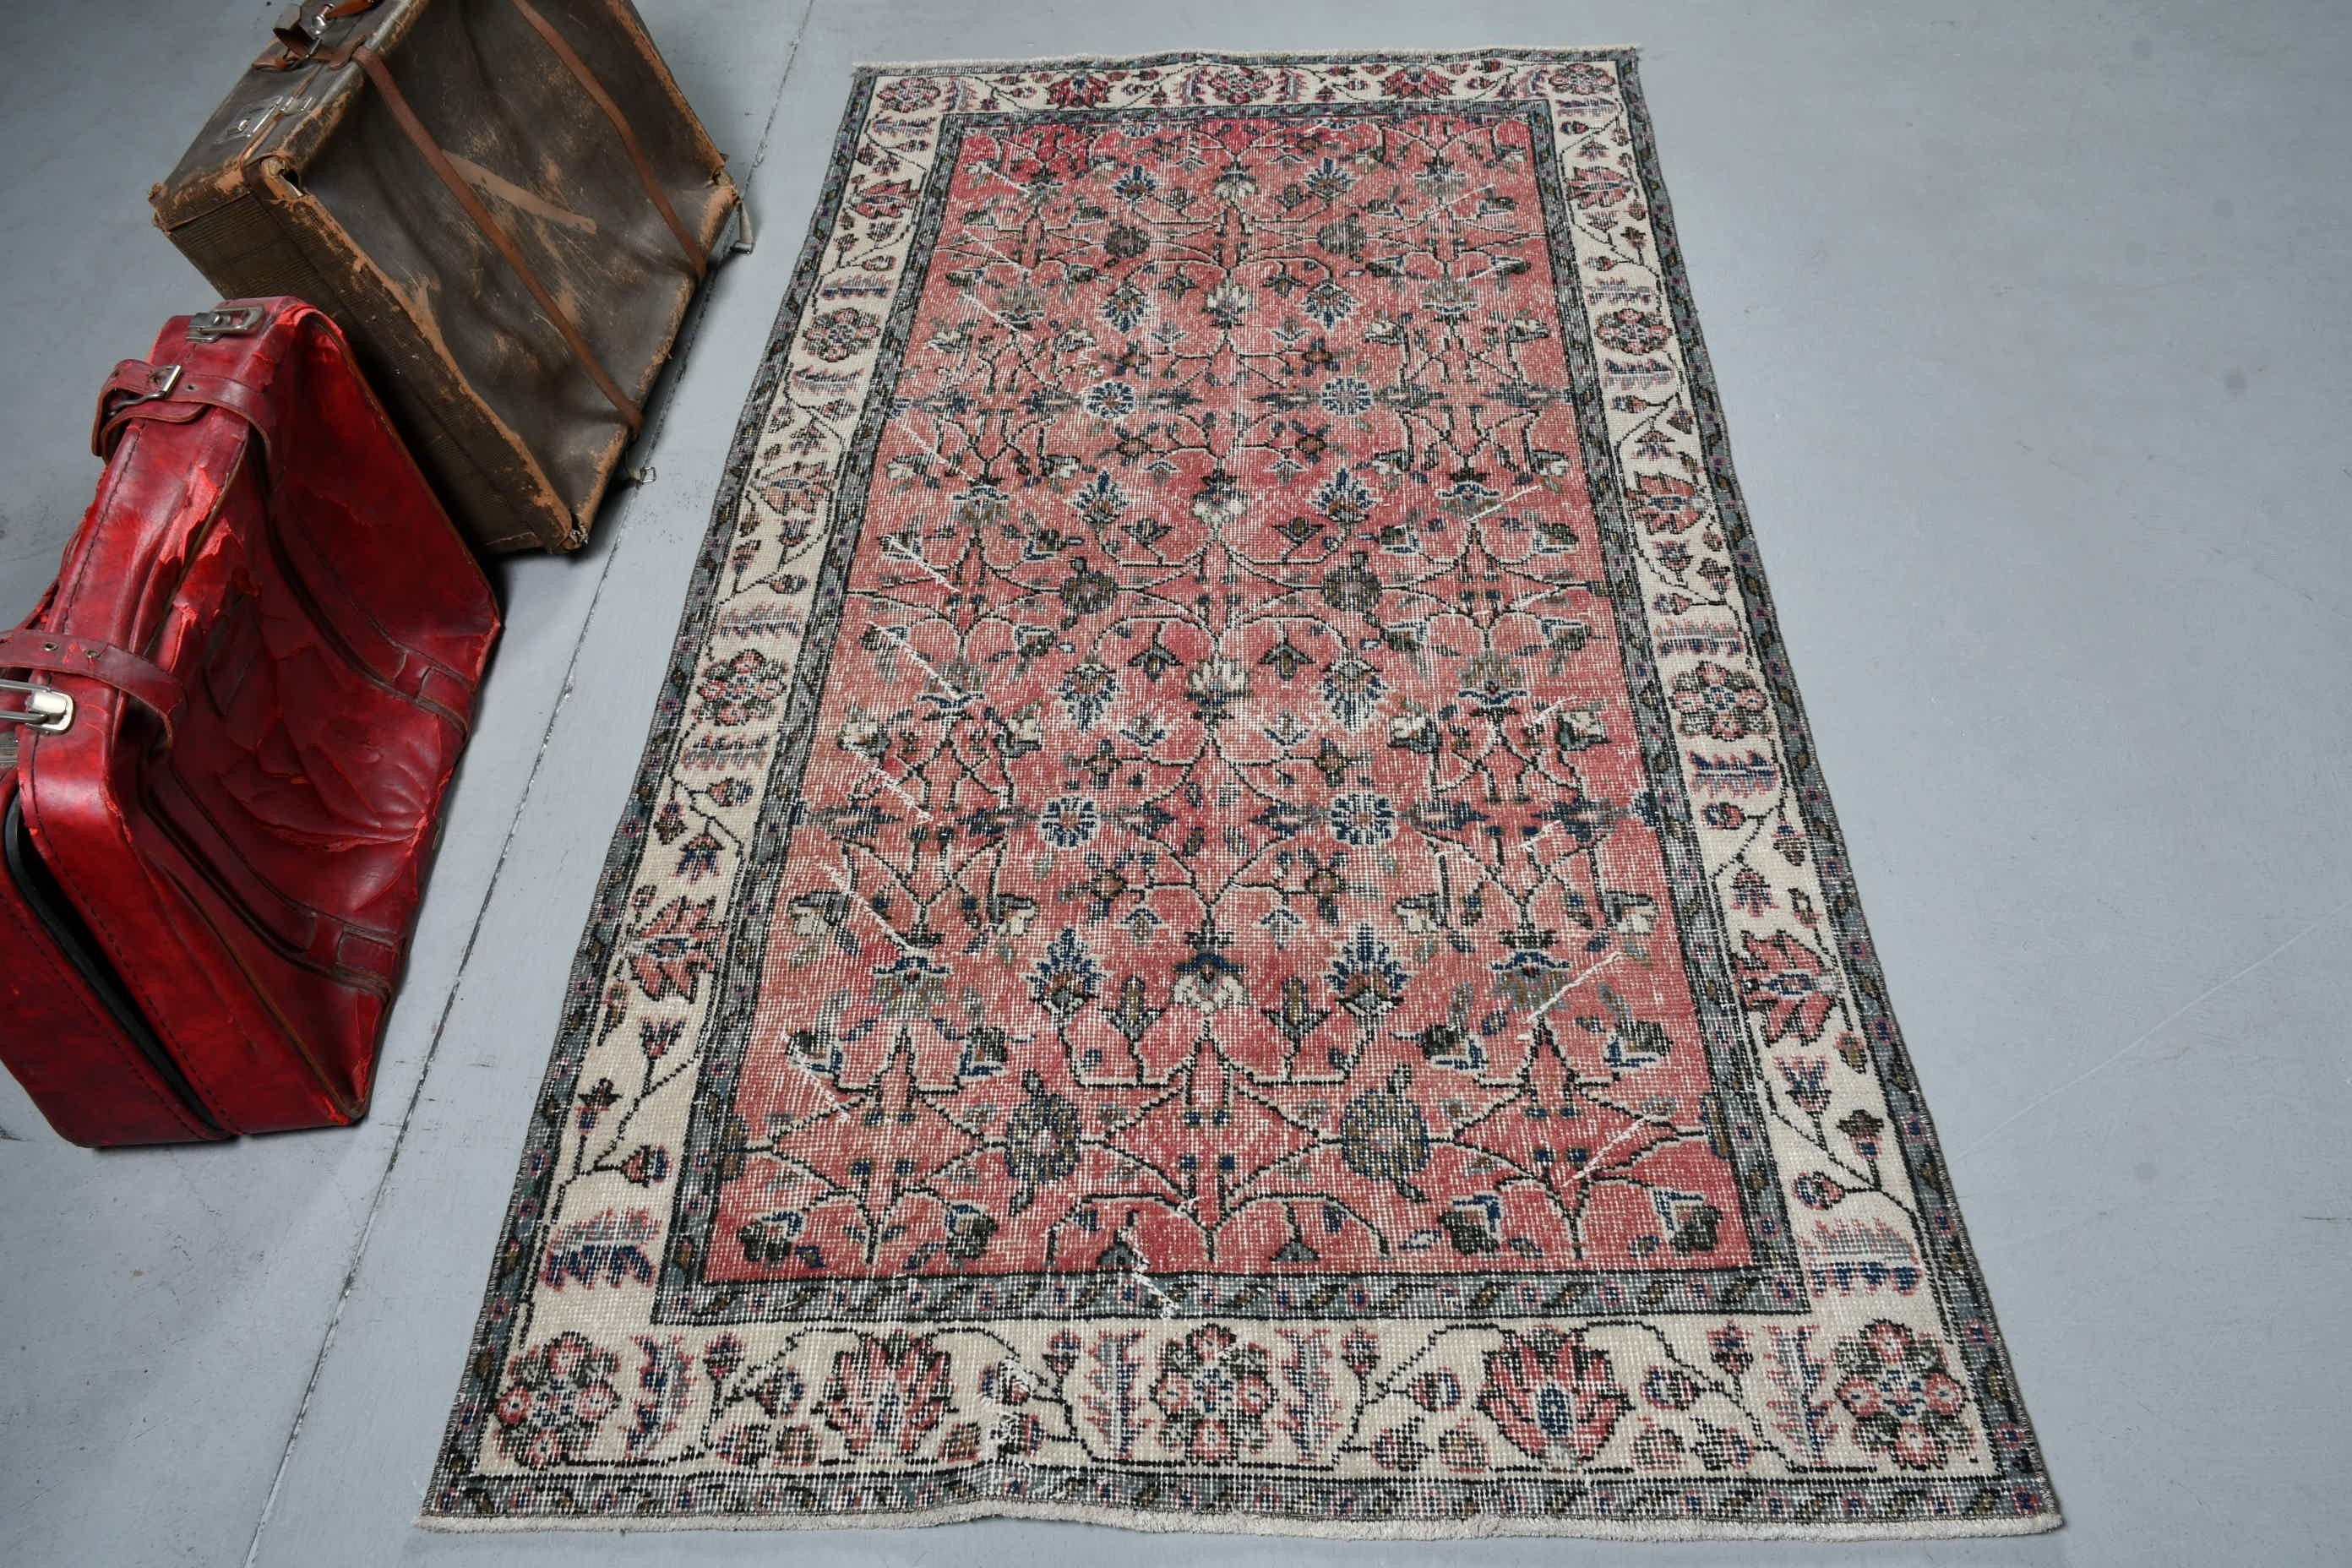 Dining Room Rug, Red  3.6x6.9 ft Area Rugs, Kitchen Rug, Moroccan Rug, Turkish Rugs, Handwoven Rug, Oushak Rug, Vintage Rugs